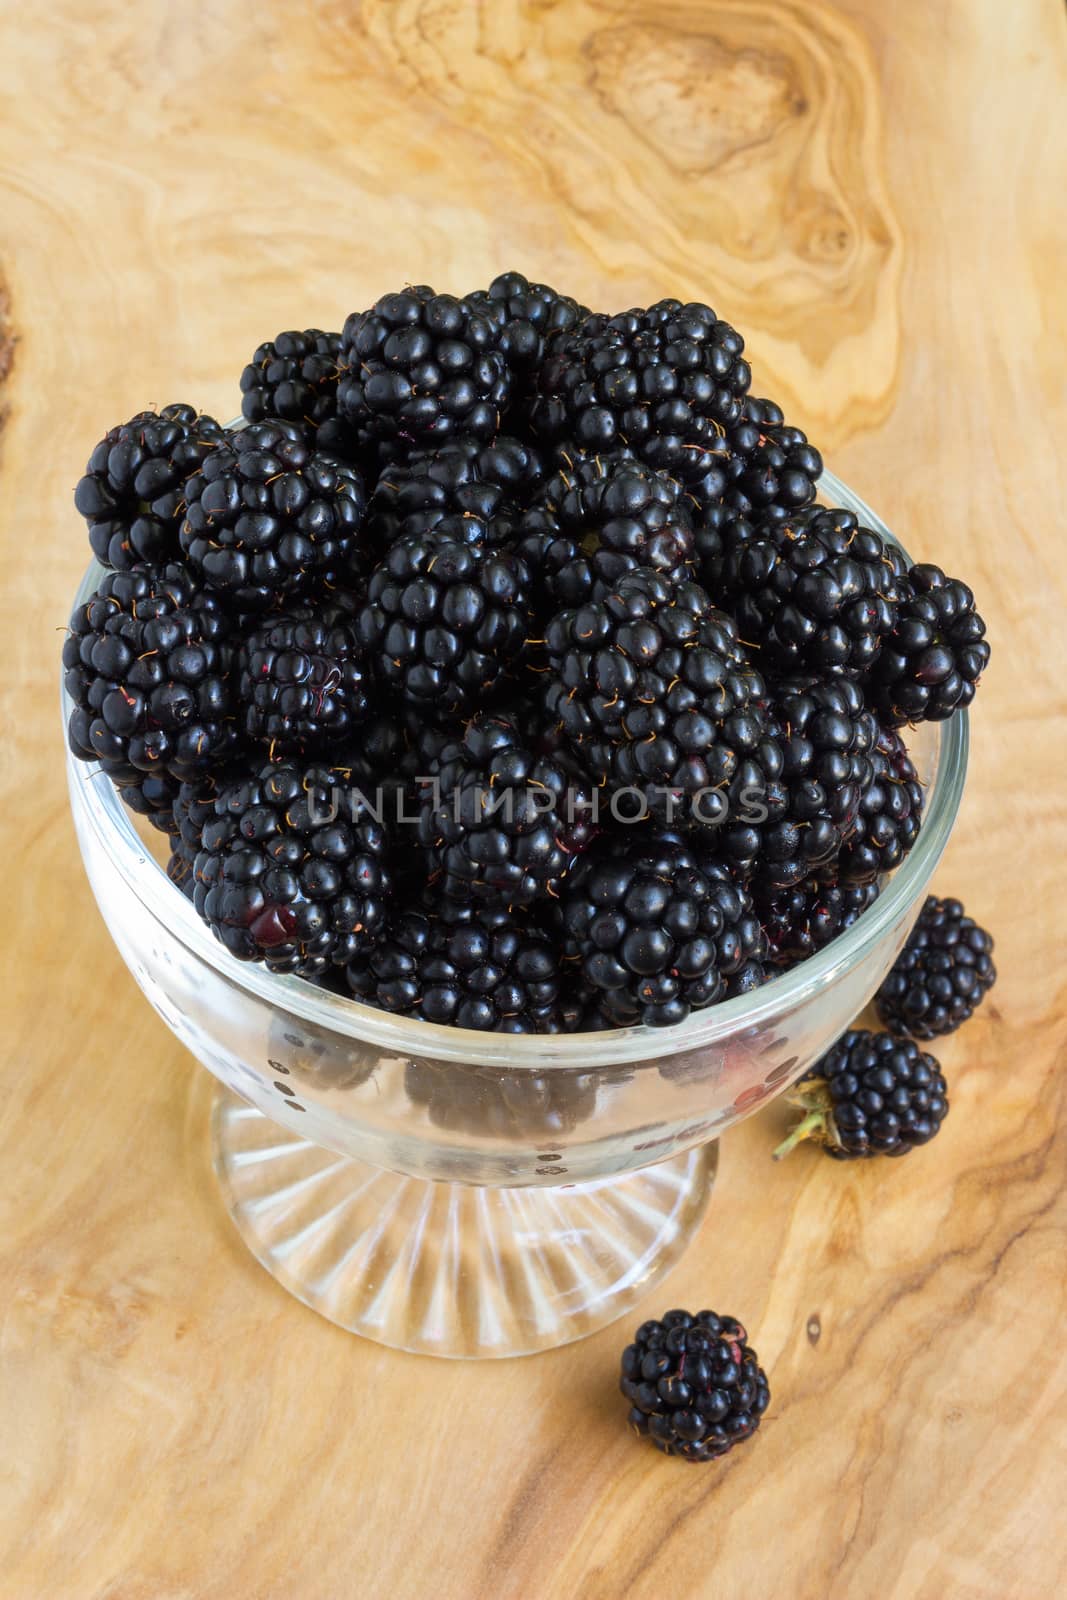 Blackberries served in a glass bowl